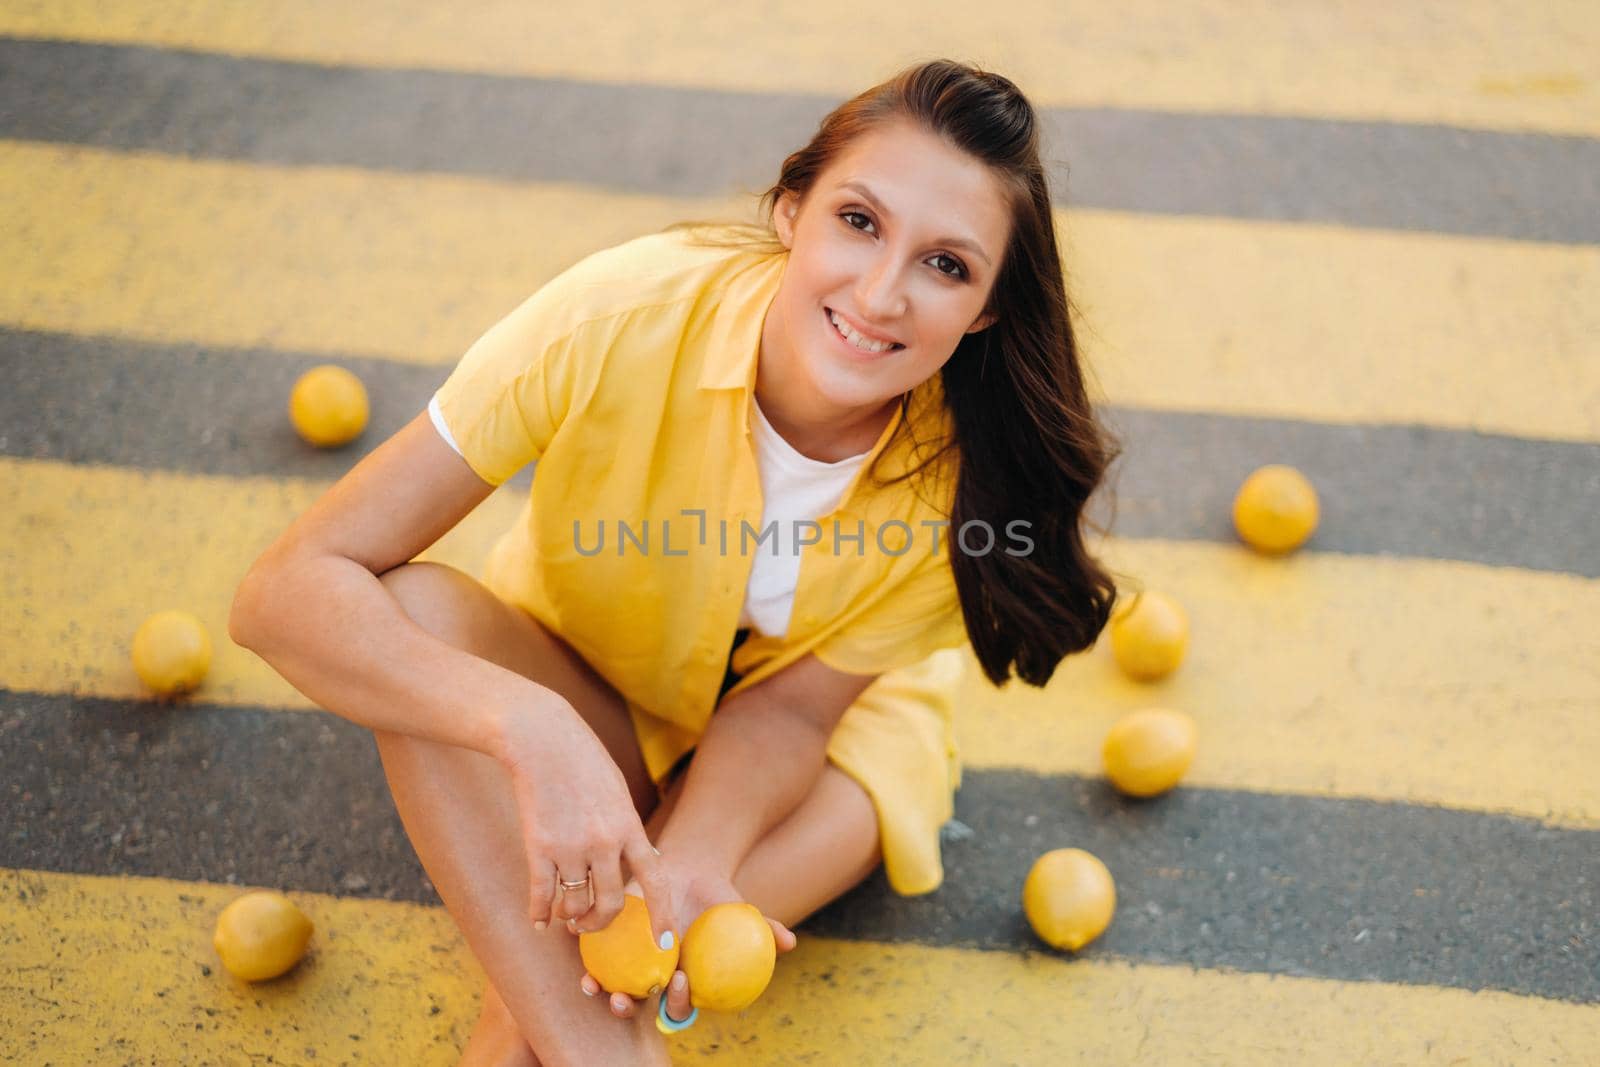 a girl with lemons in a yellow shirt, shorts and black shoes sits on a yellow pedestrian crossing in the city. The lemon mood by Lobachad